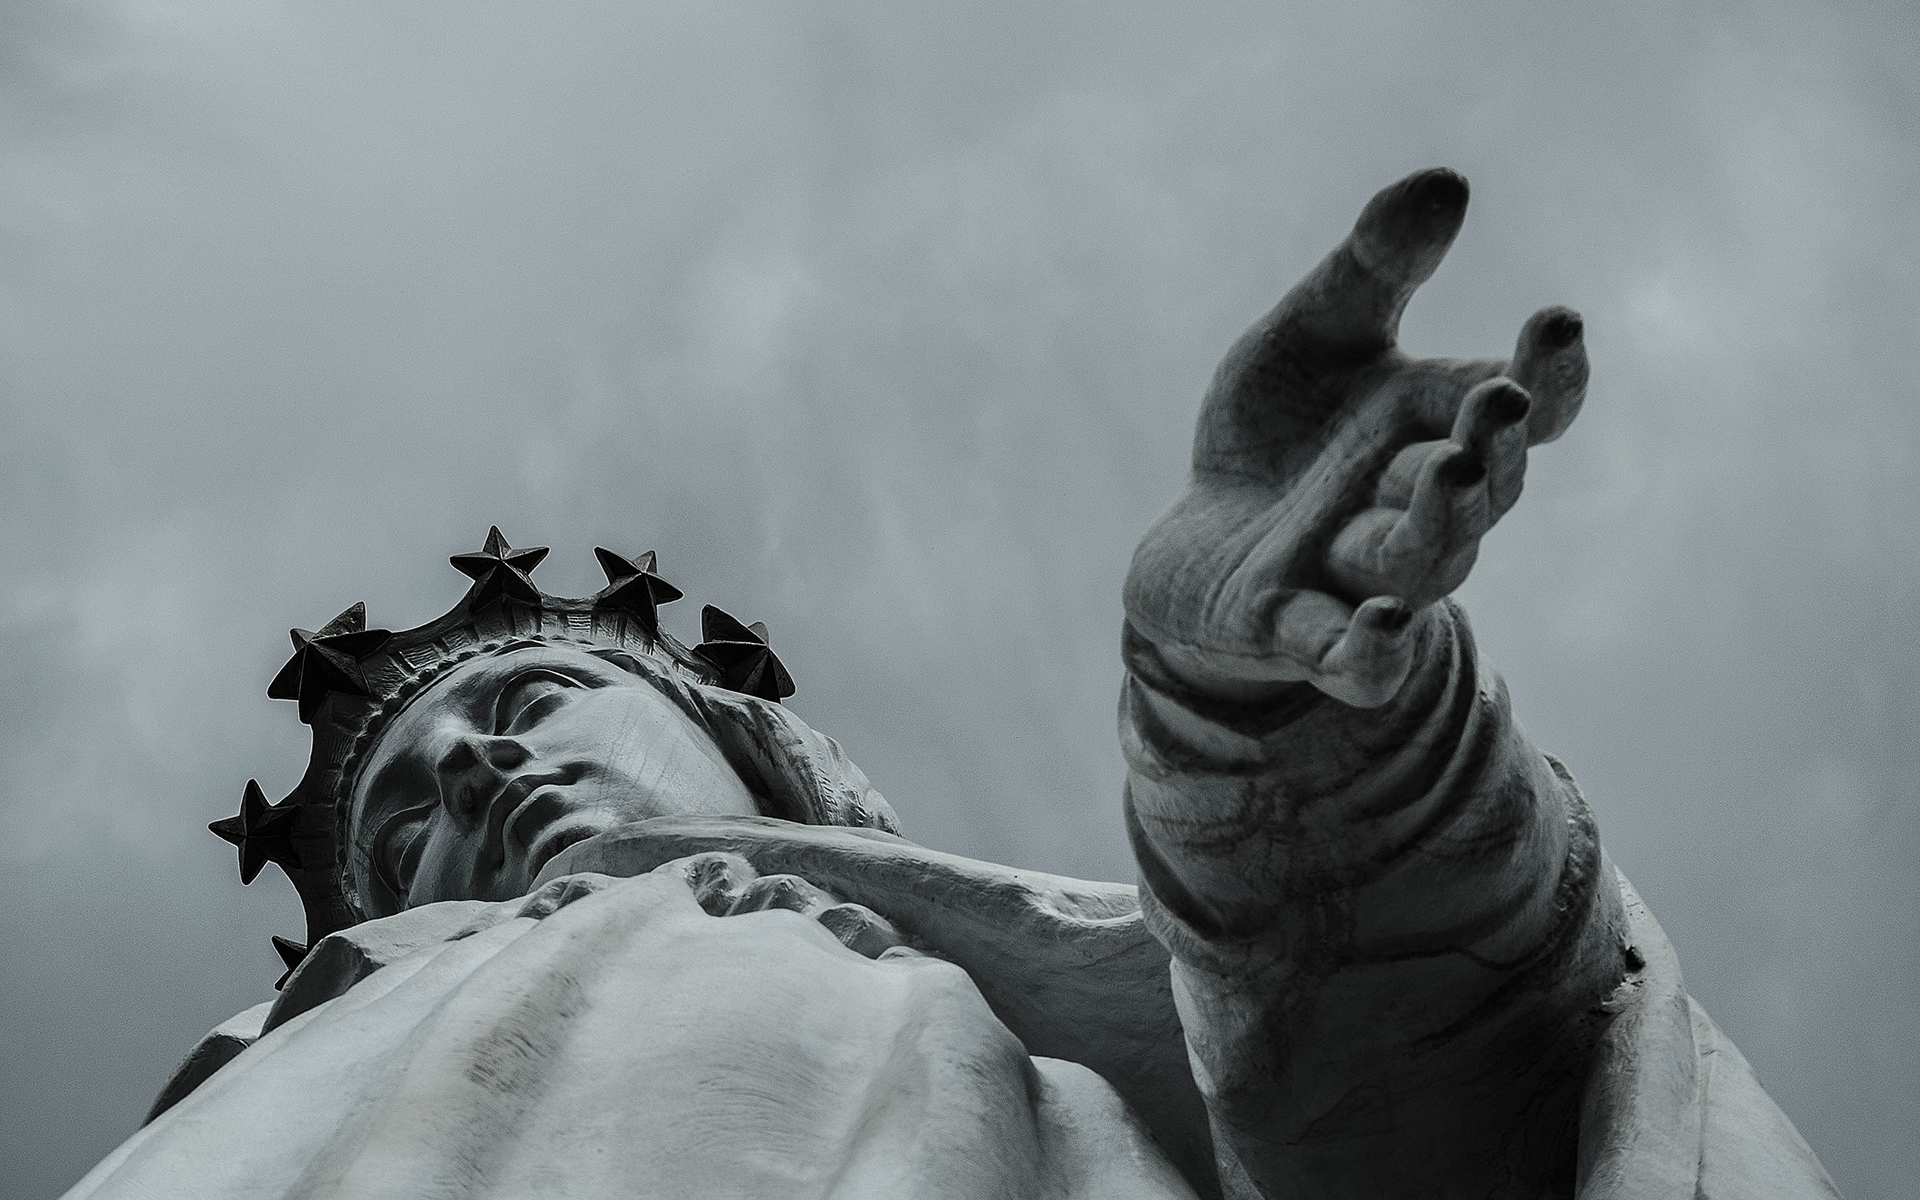 photography, Statue, Monument, Gothic, Religion, Sky, Skies, Clouds, People, Hands, Metal, Bronze, Artistic Wallpaper